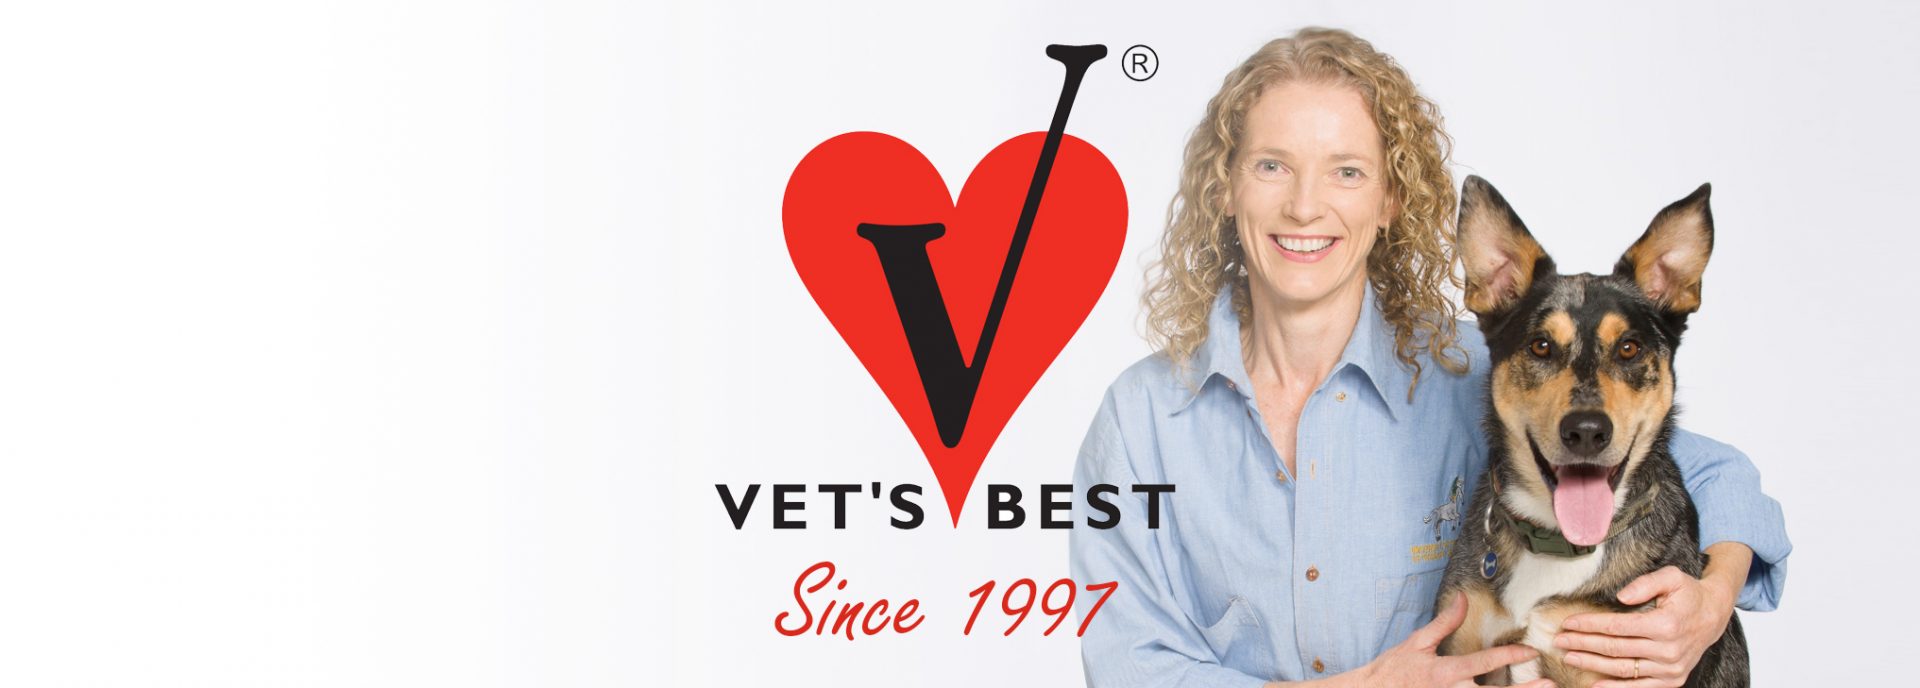 Vets Best Products